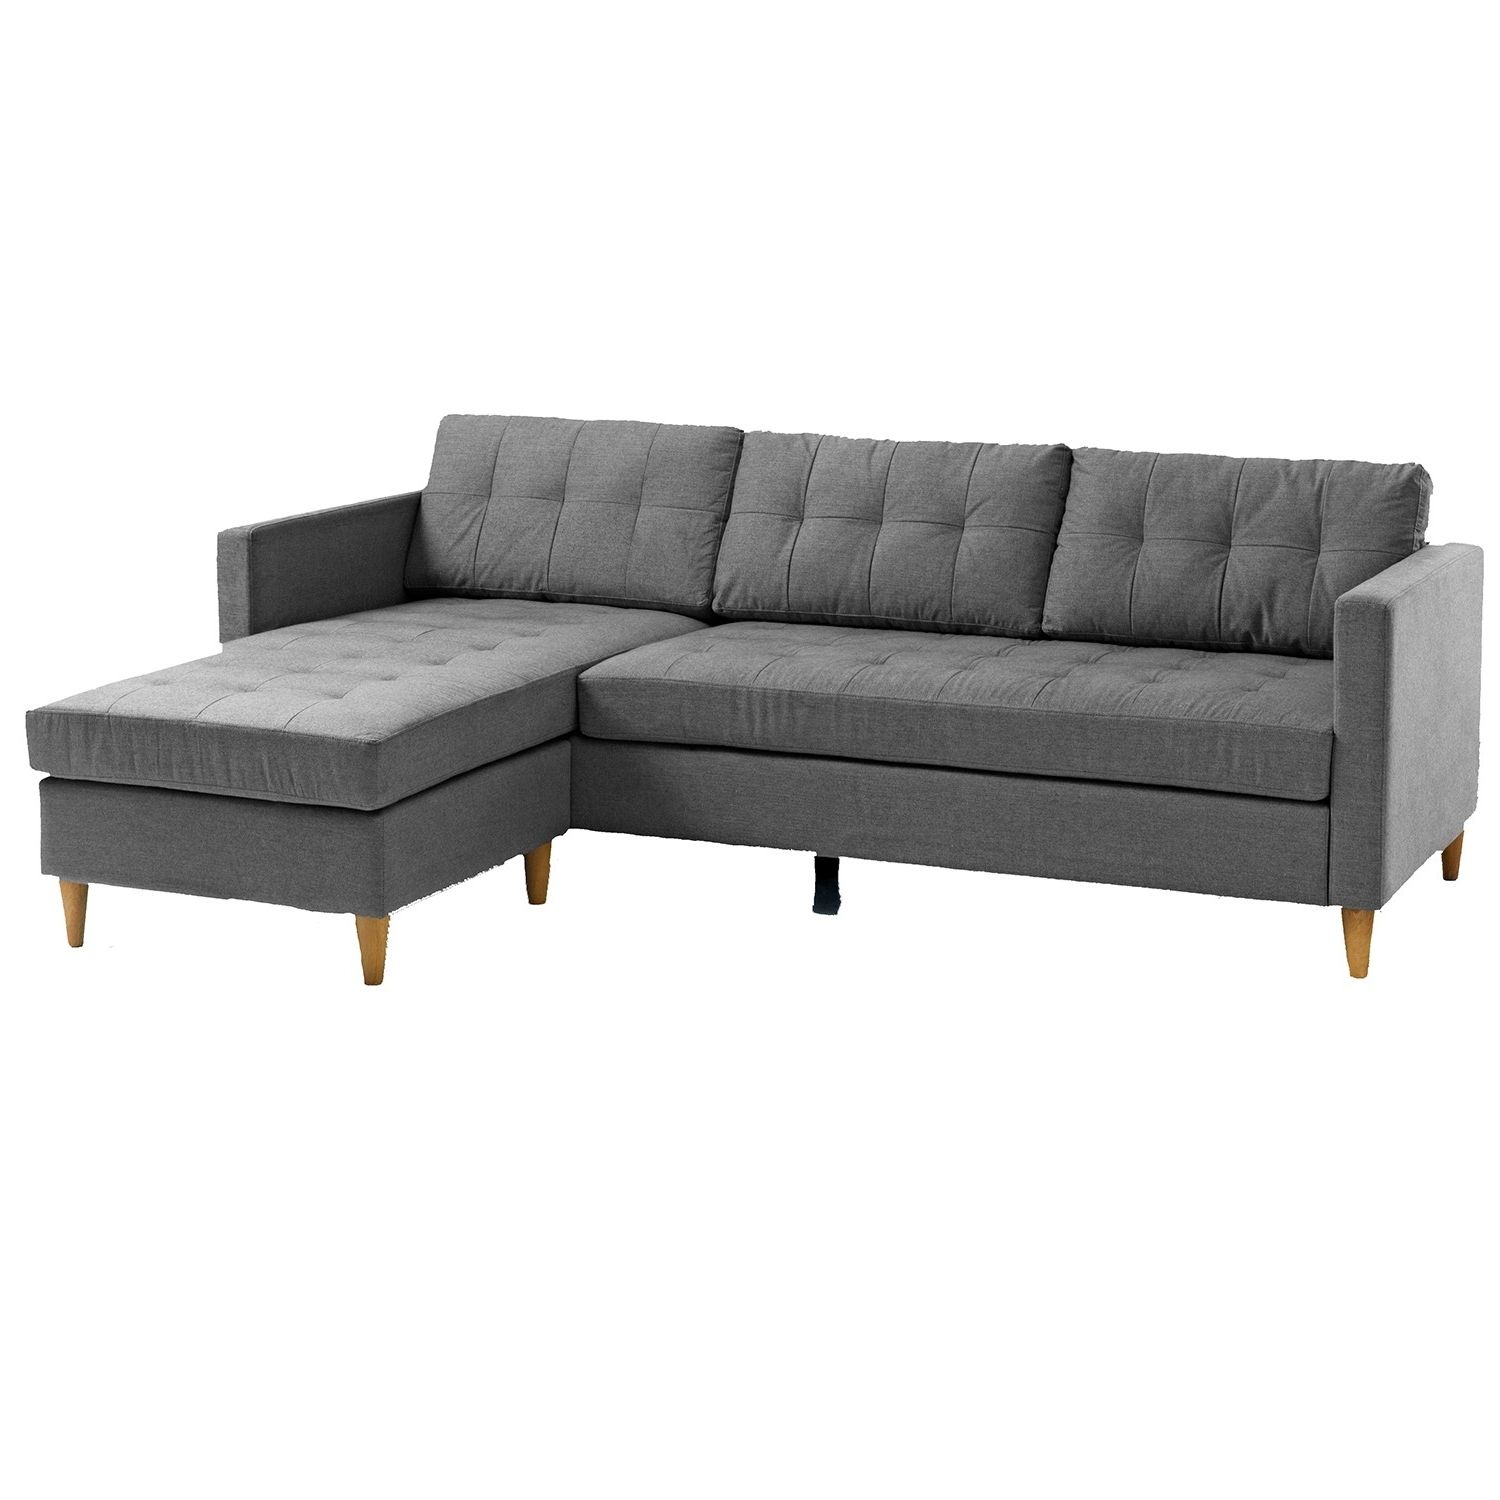 Most Popular Jysk Canada Sofa Bed (View 6 of 15)